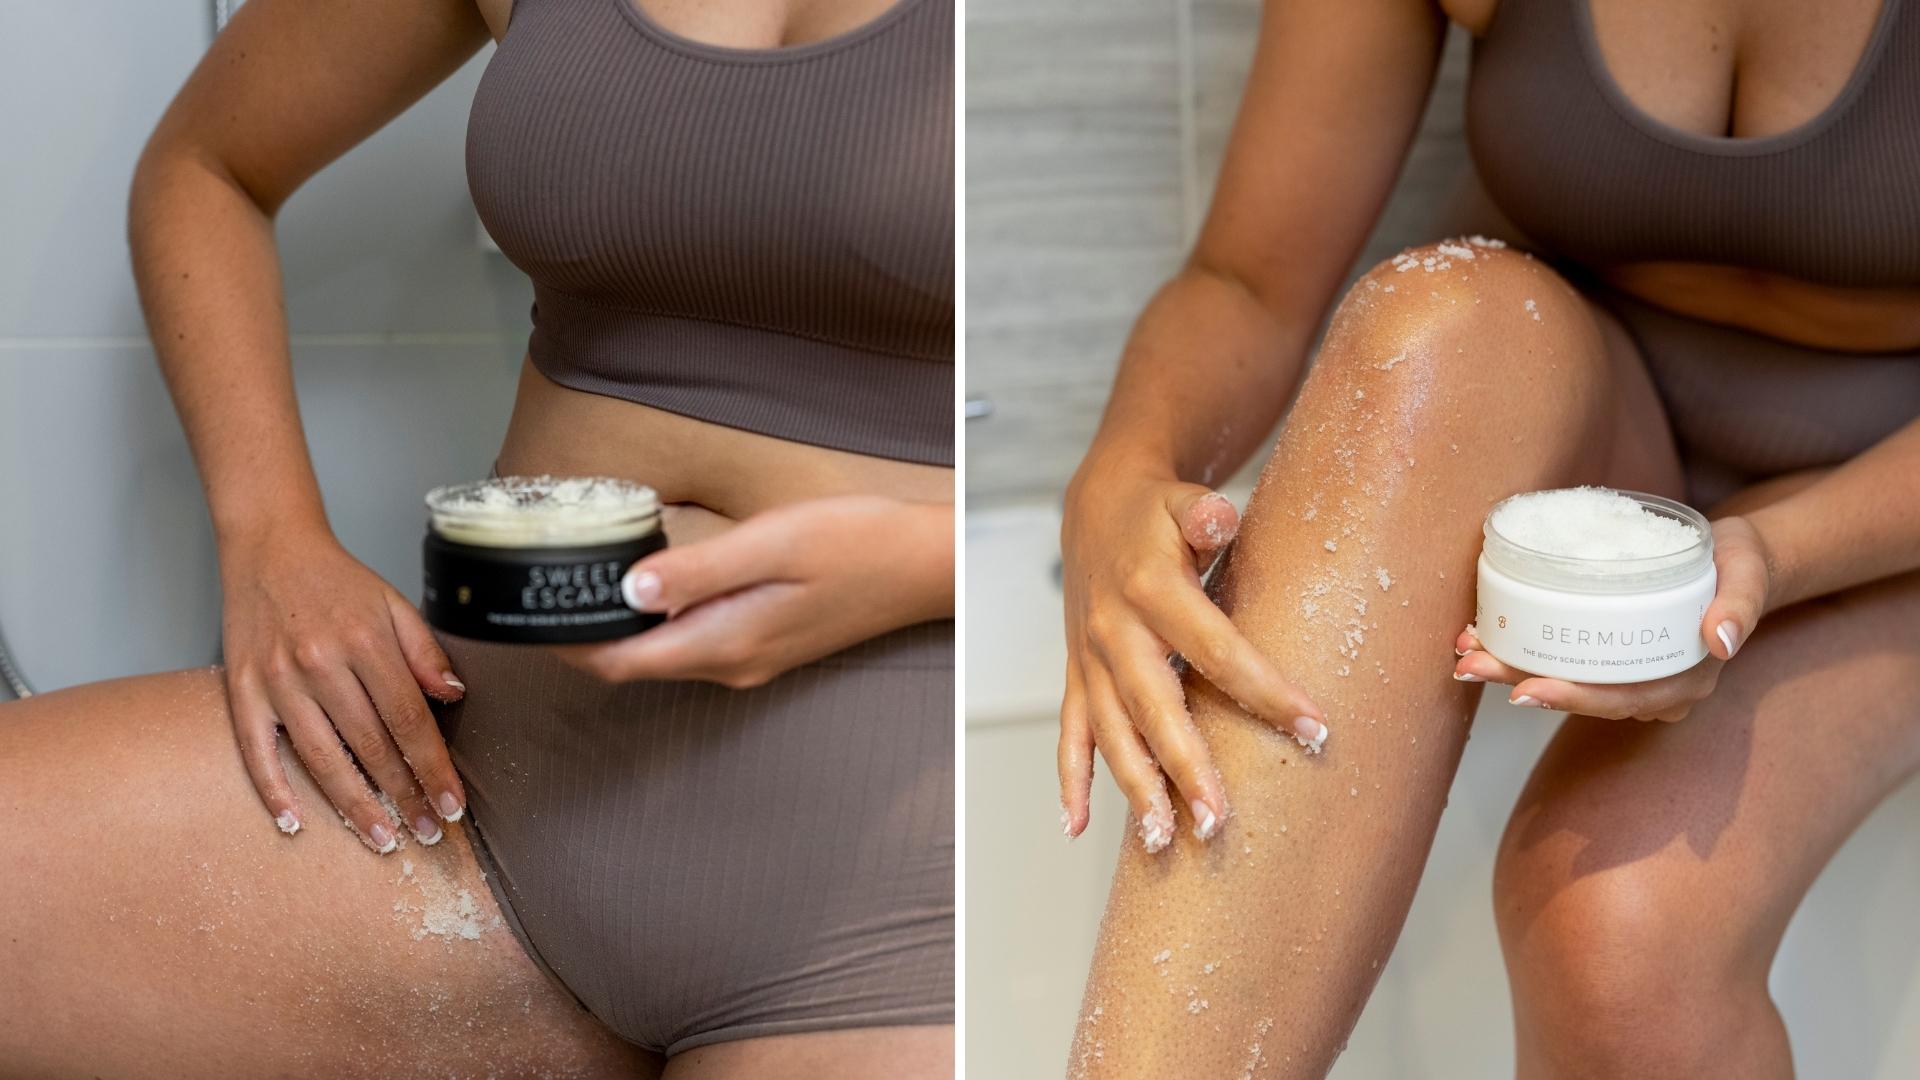 Two examples of exfoliating your bikini line and vag area